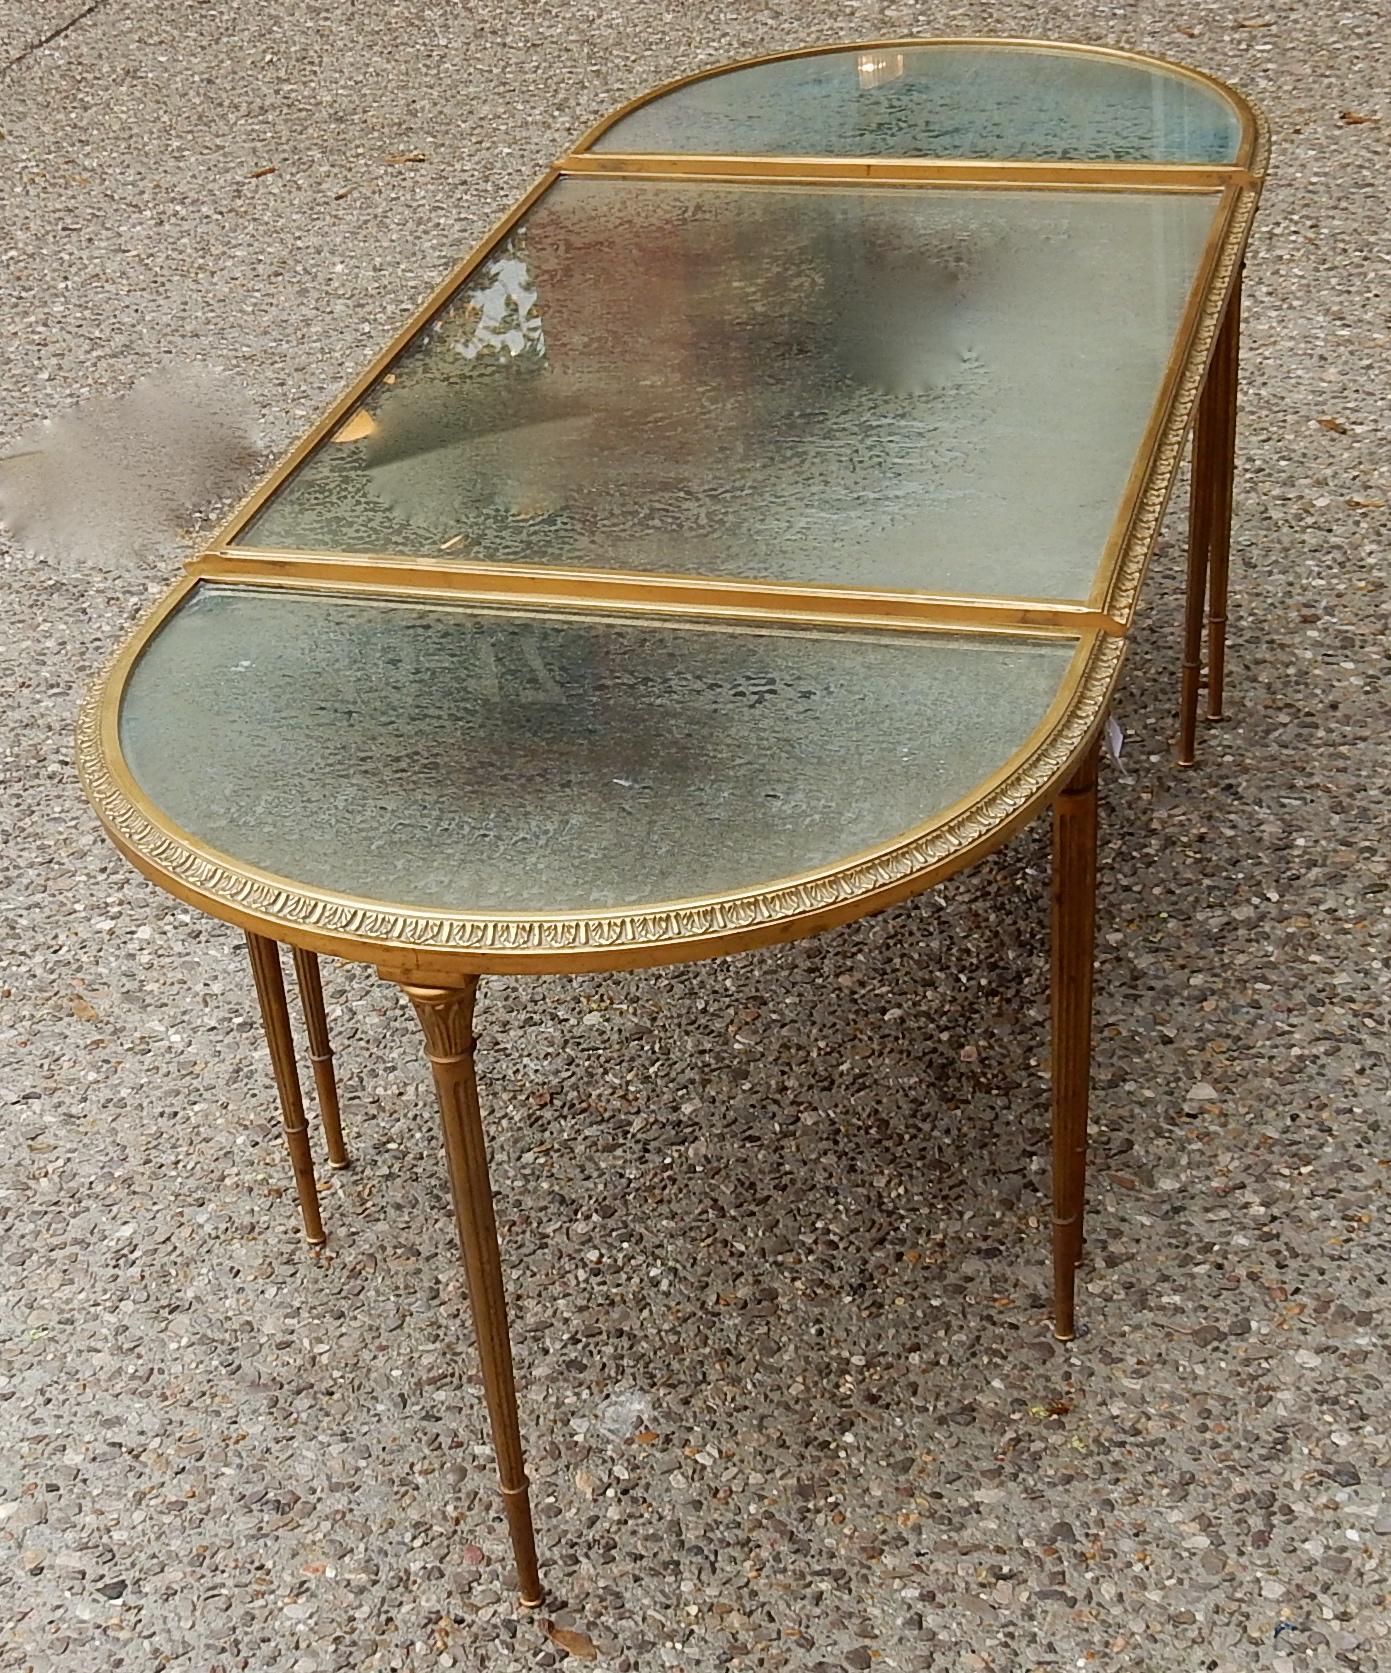 1970s in the style of Maison Charles or Maison Jansen or Maison bagués golden brass tripartite table, with olded mirror trays, .
Everything is demountable and screwed
Good condition.
Not signed
Measures: Middle table width 60 cm
Half-moon depth